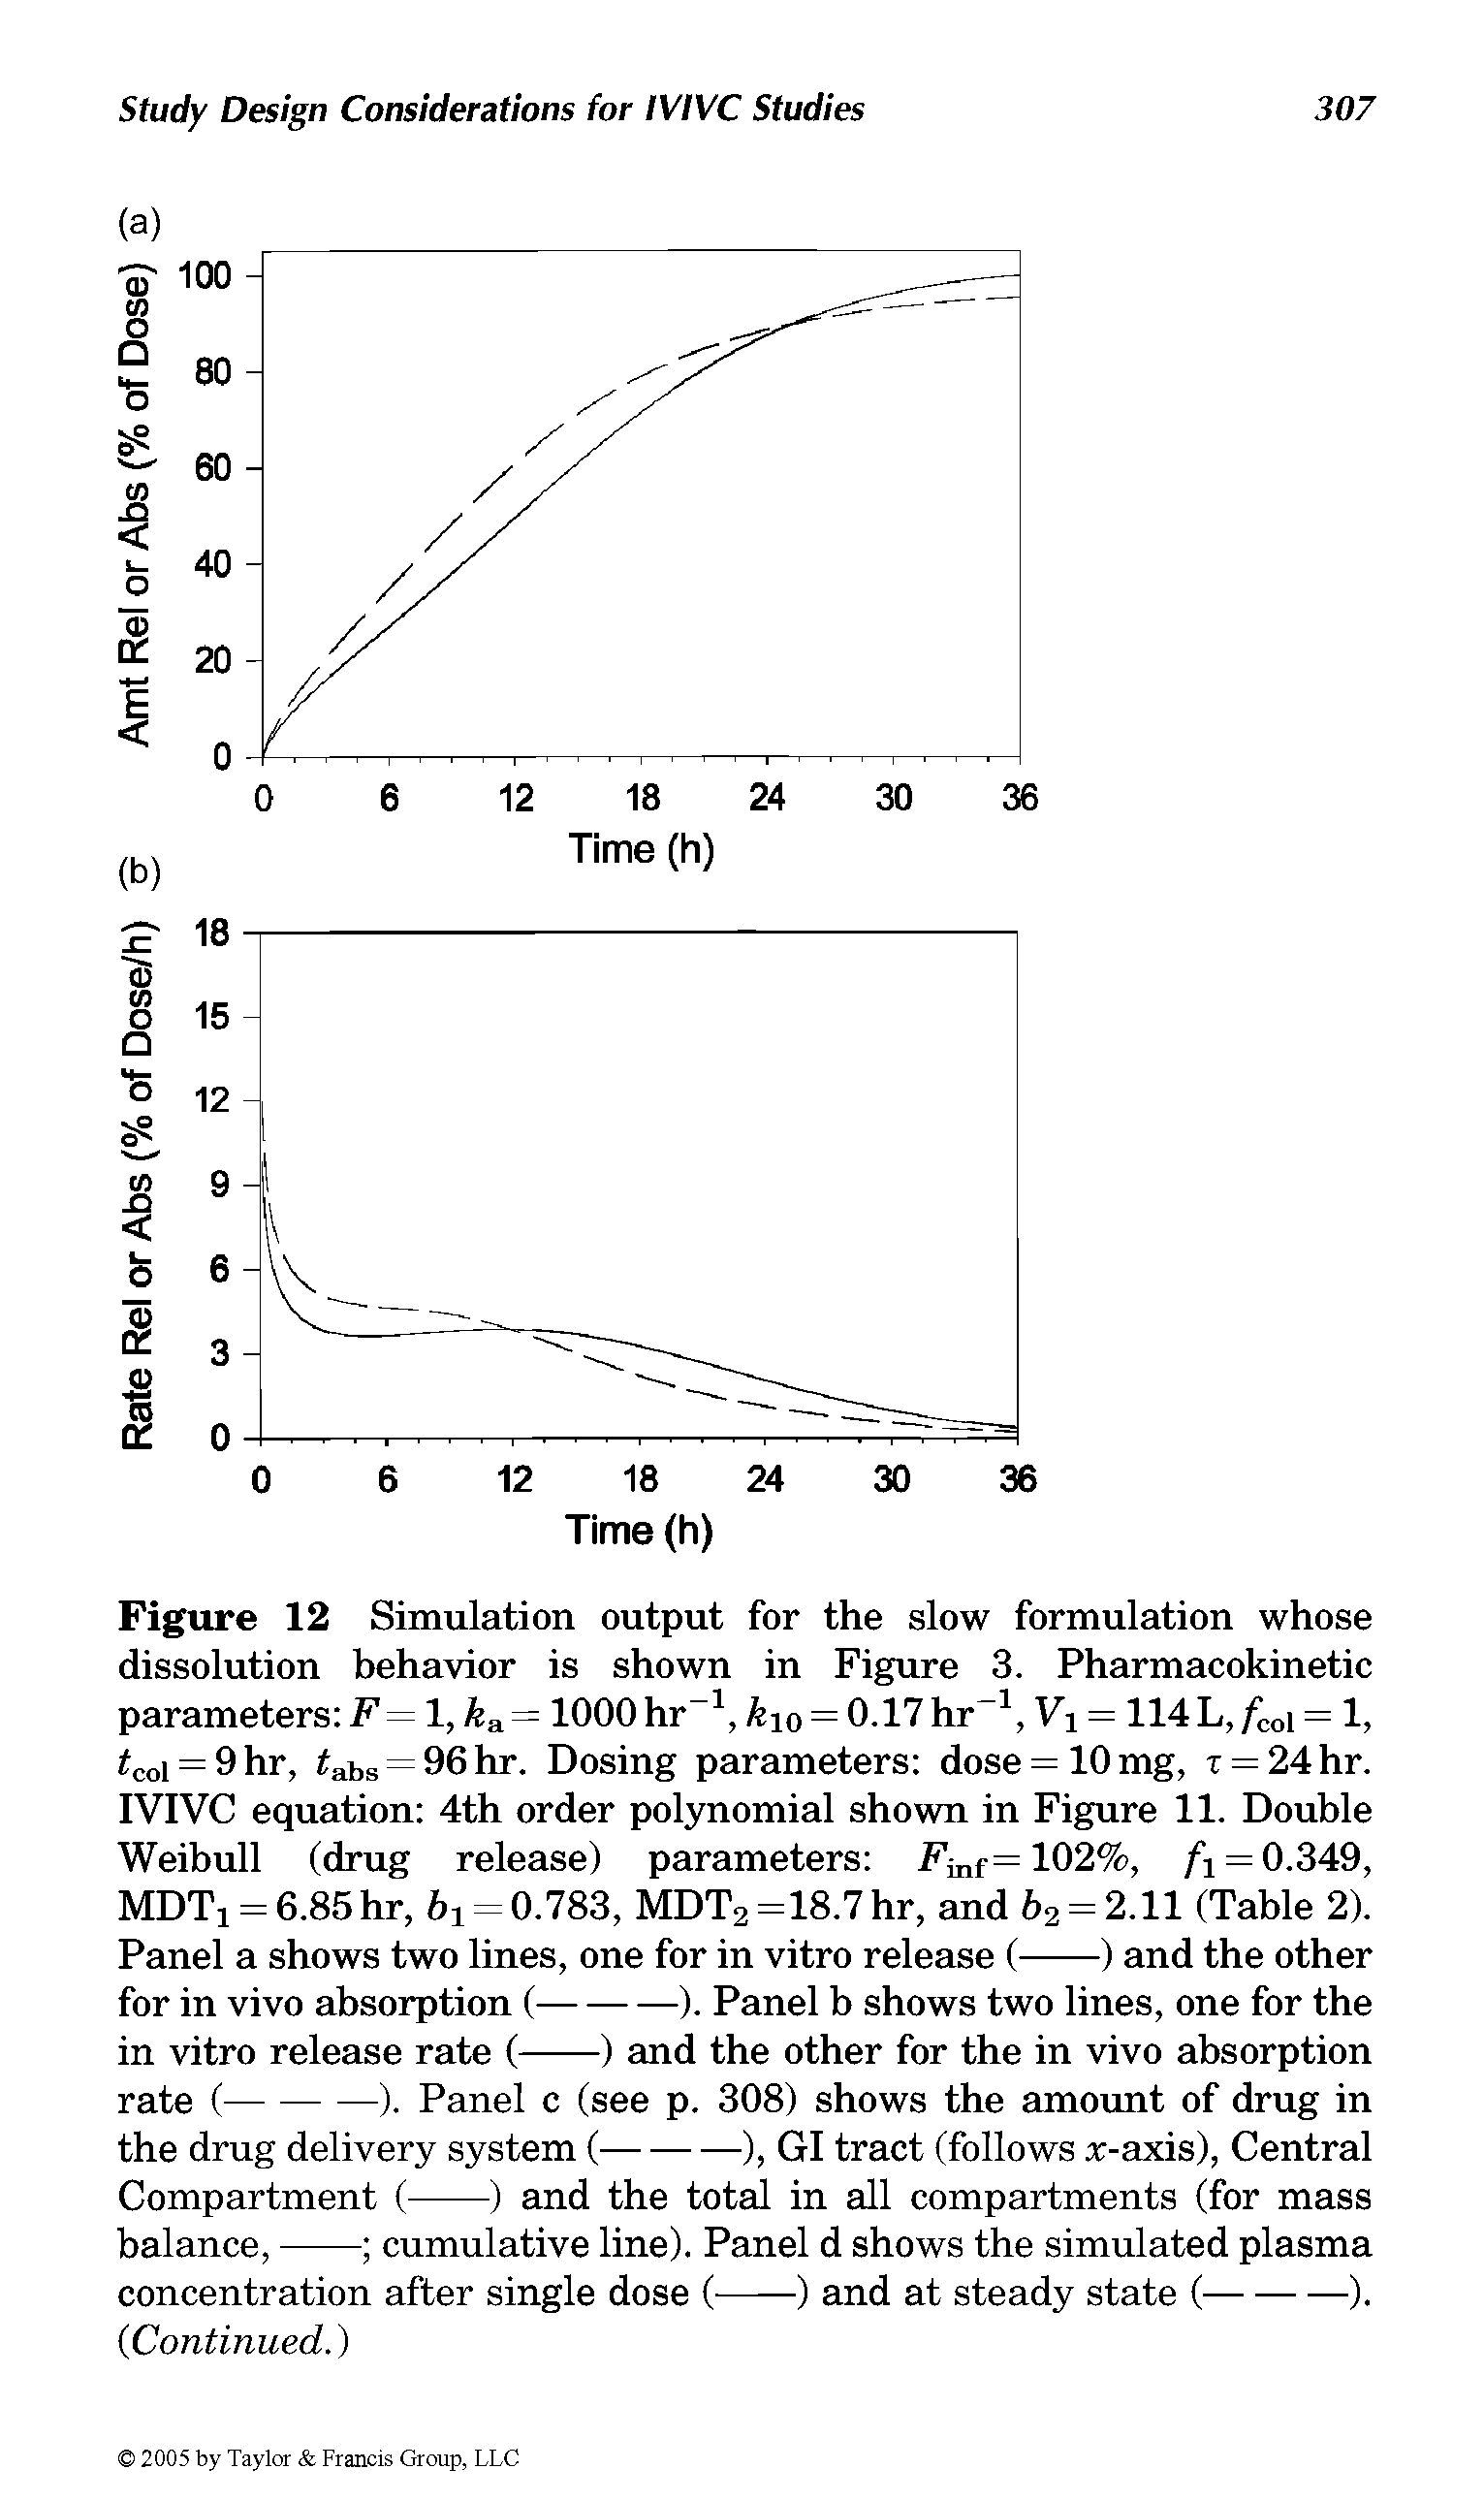 Figure 12 Simulation output for the slow formulation whose dissolution behavior is shown in Figure 3. Pharmacokinetic parameters F= 1, ka = 1000 hr-1, kw = 0.17 hr-1, V = 114L,/c0i = 1, tcol = 9 hr, ahs 96 hr. Dosing parameters dose = 10 mg, i = 24hr. IVIVC equation 4th order polynomial shown in Figure 11. Double Weibull (drug release) parameters Finf=102%, fi = 0.349, MDTa = 6.85 hr, 61 = 0.783, MDT2=18.7hr, and b2 = 2.11 (Table 2).